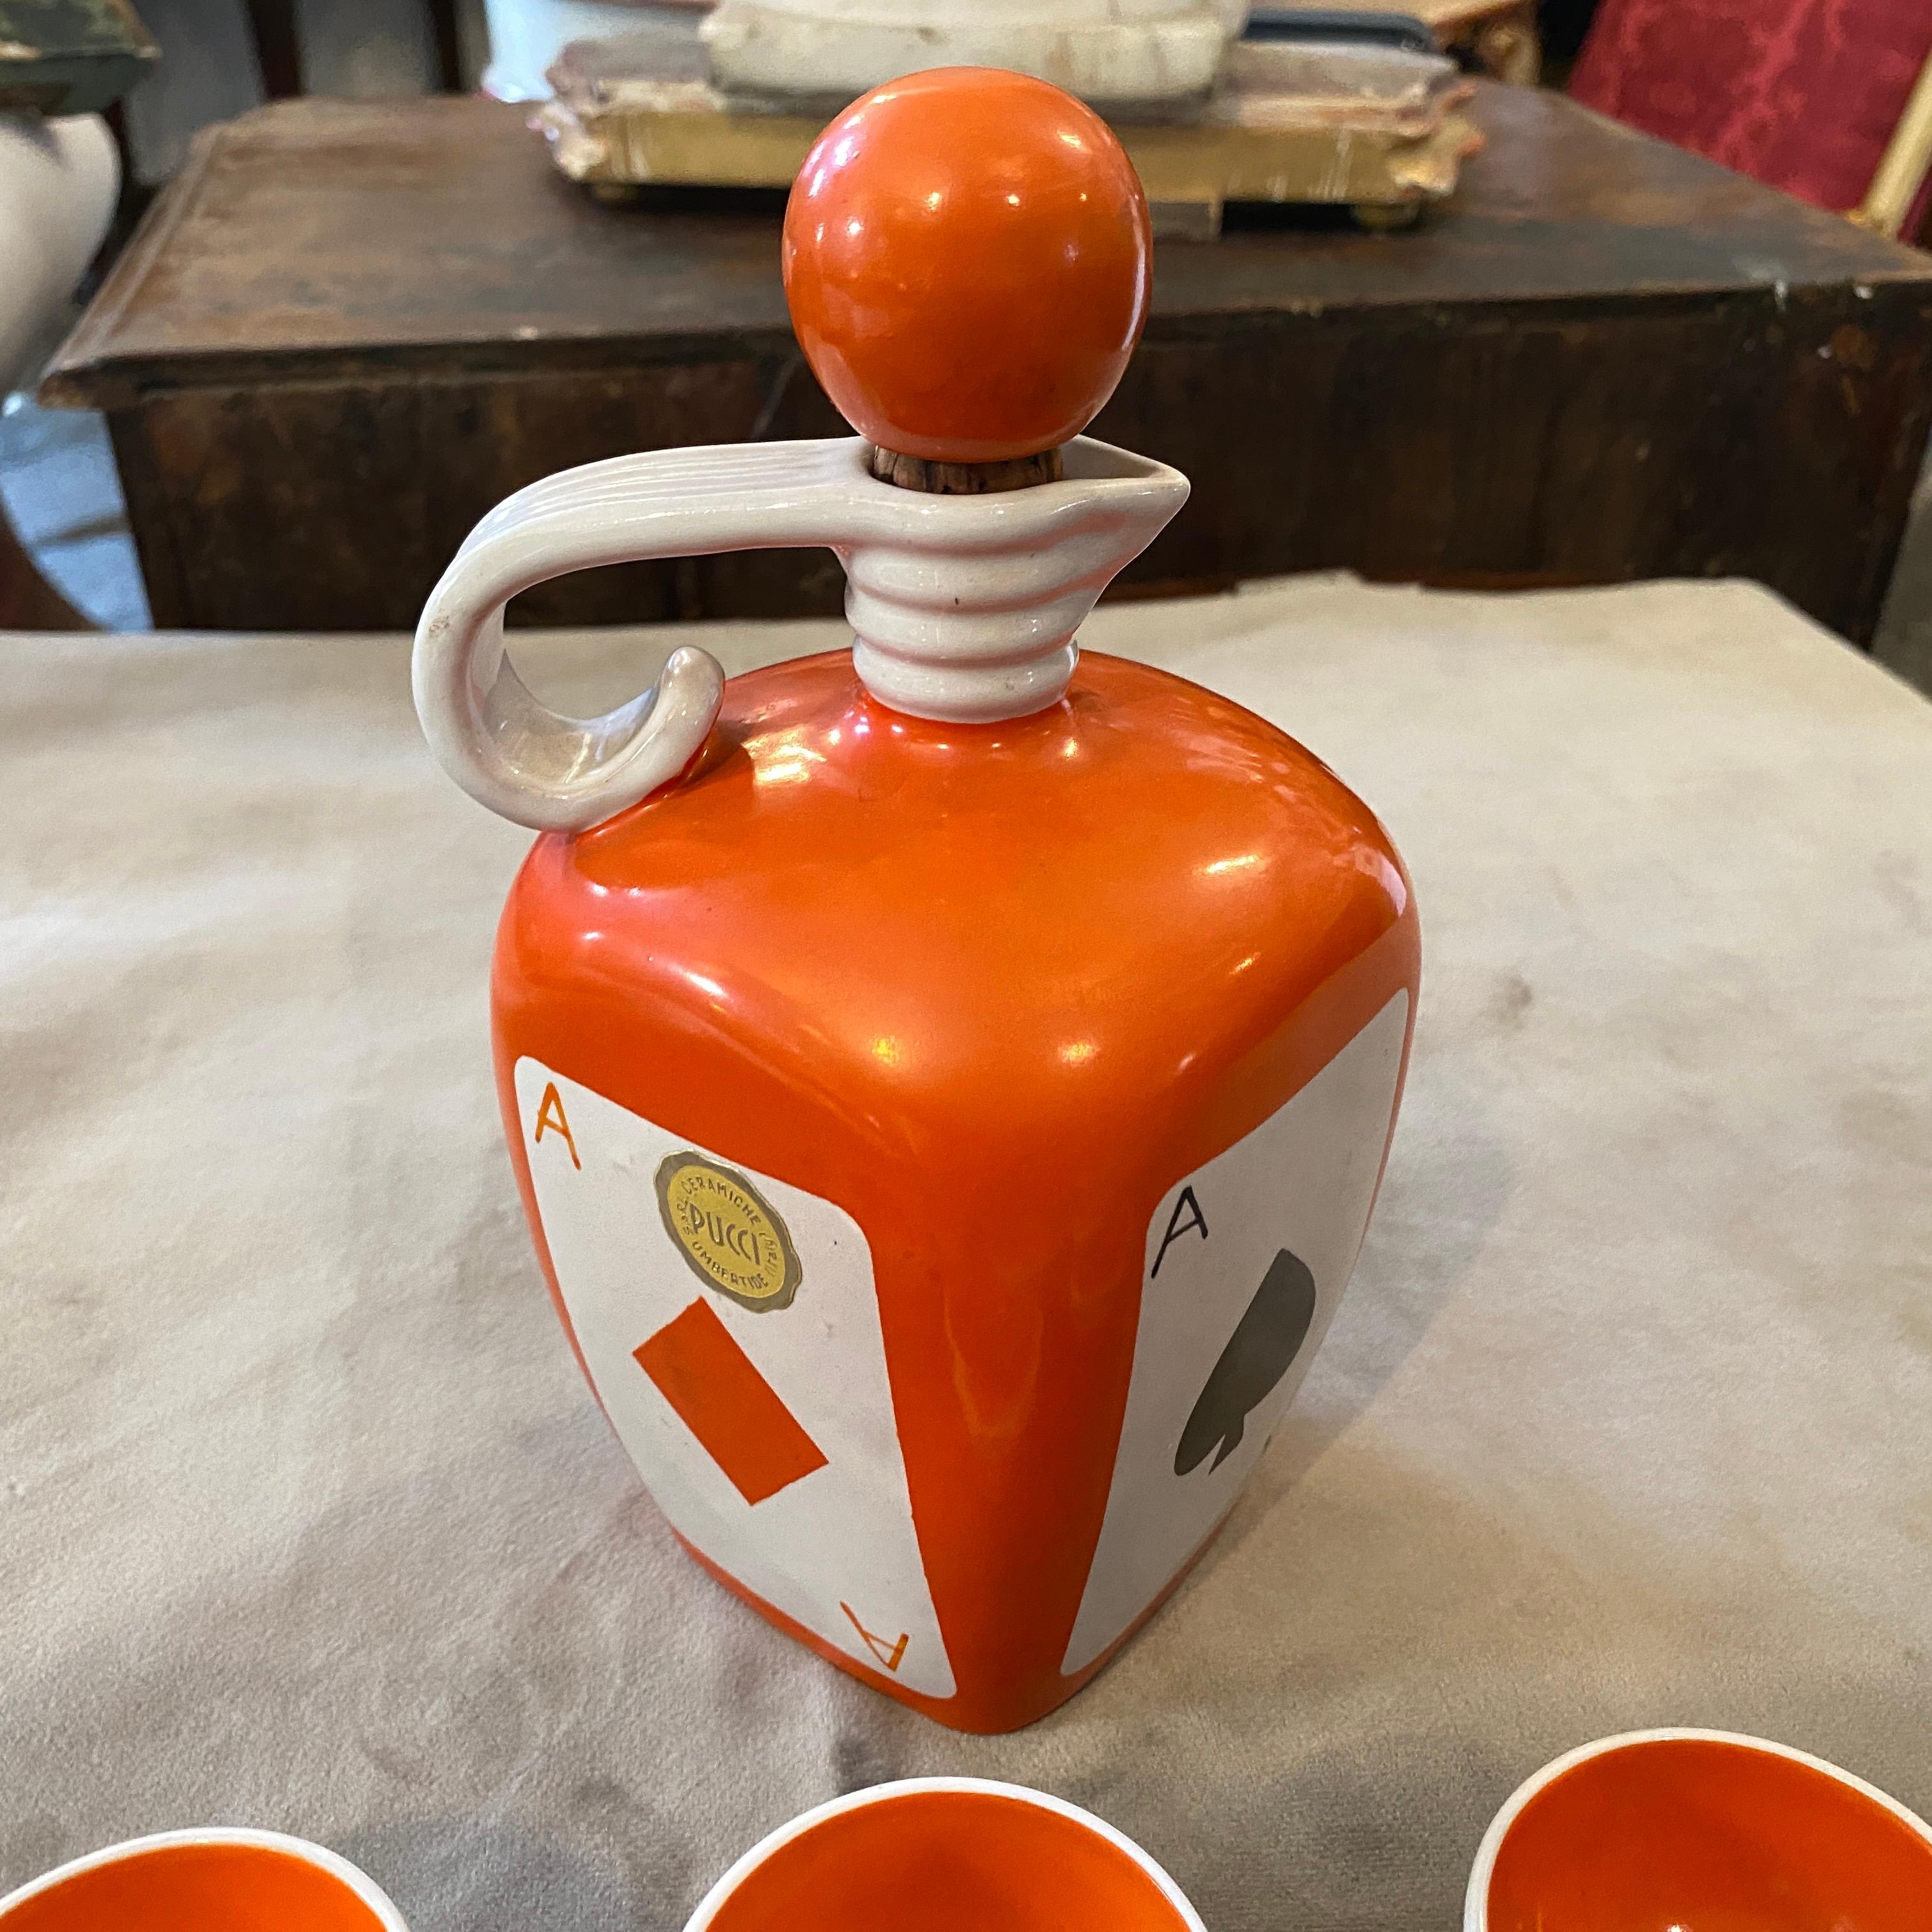 A particular orange black and white ceramic liquor set made by Italian famous manufacturer Pucci. The bottle is decorated with poker cards suits.